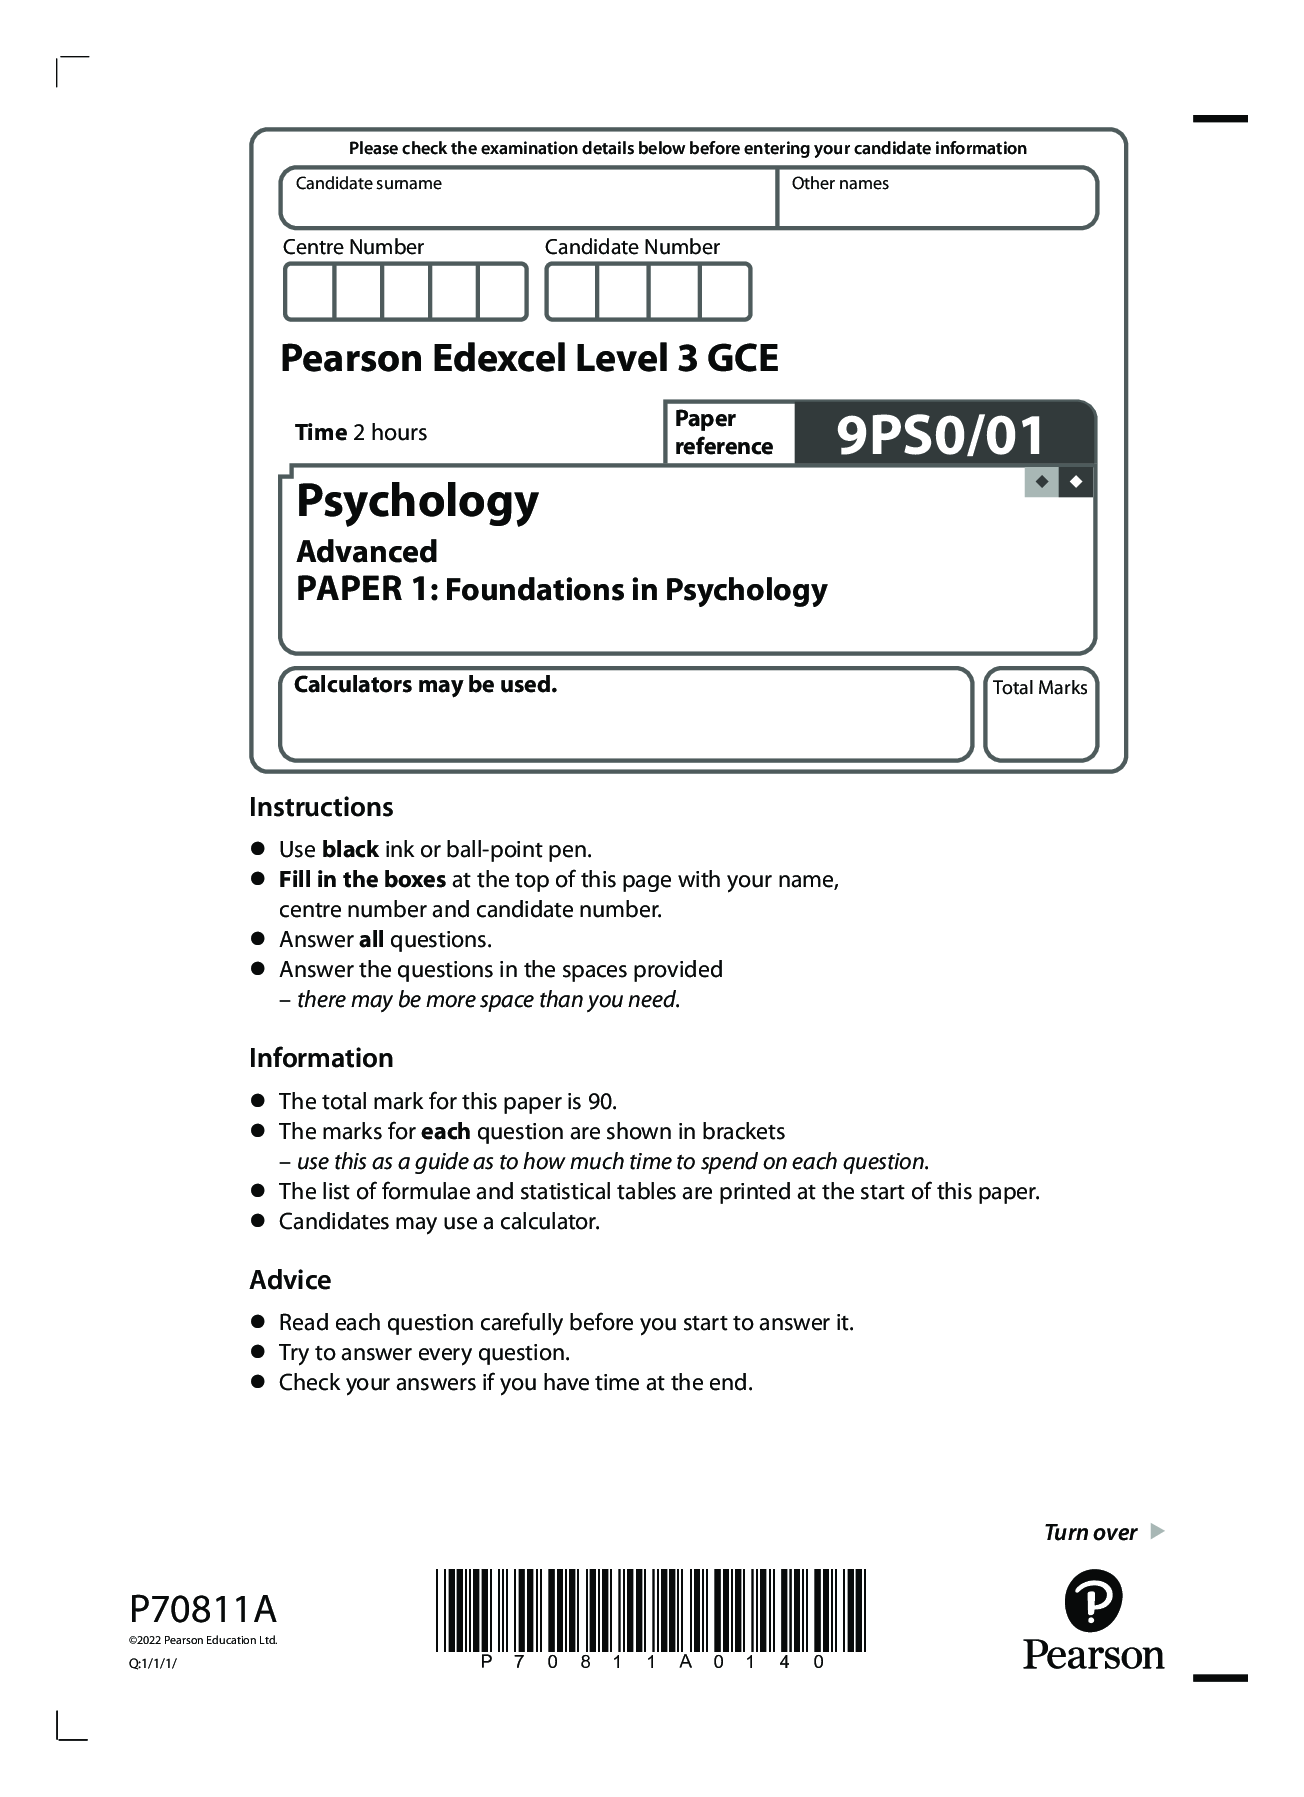 research methods in psychology a level past papers